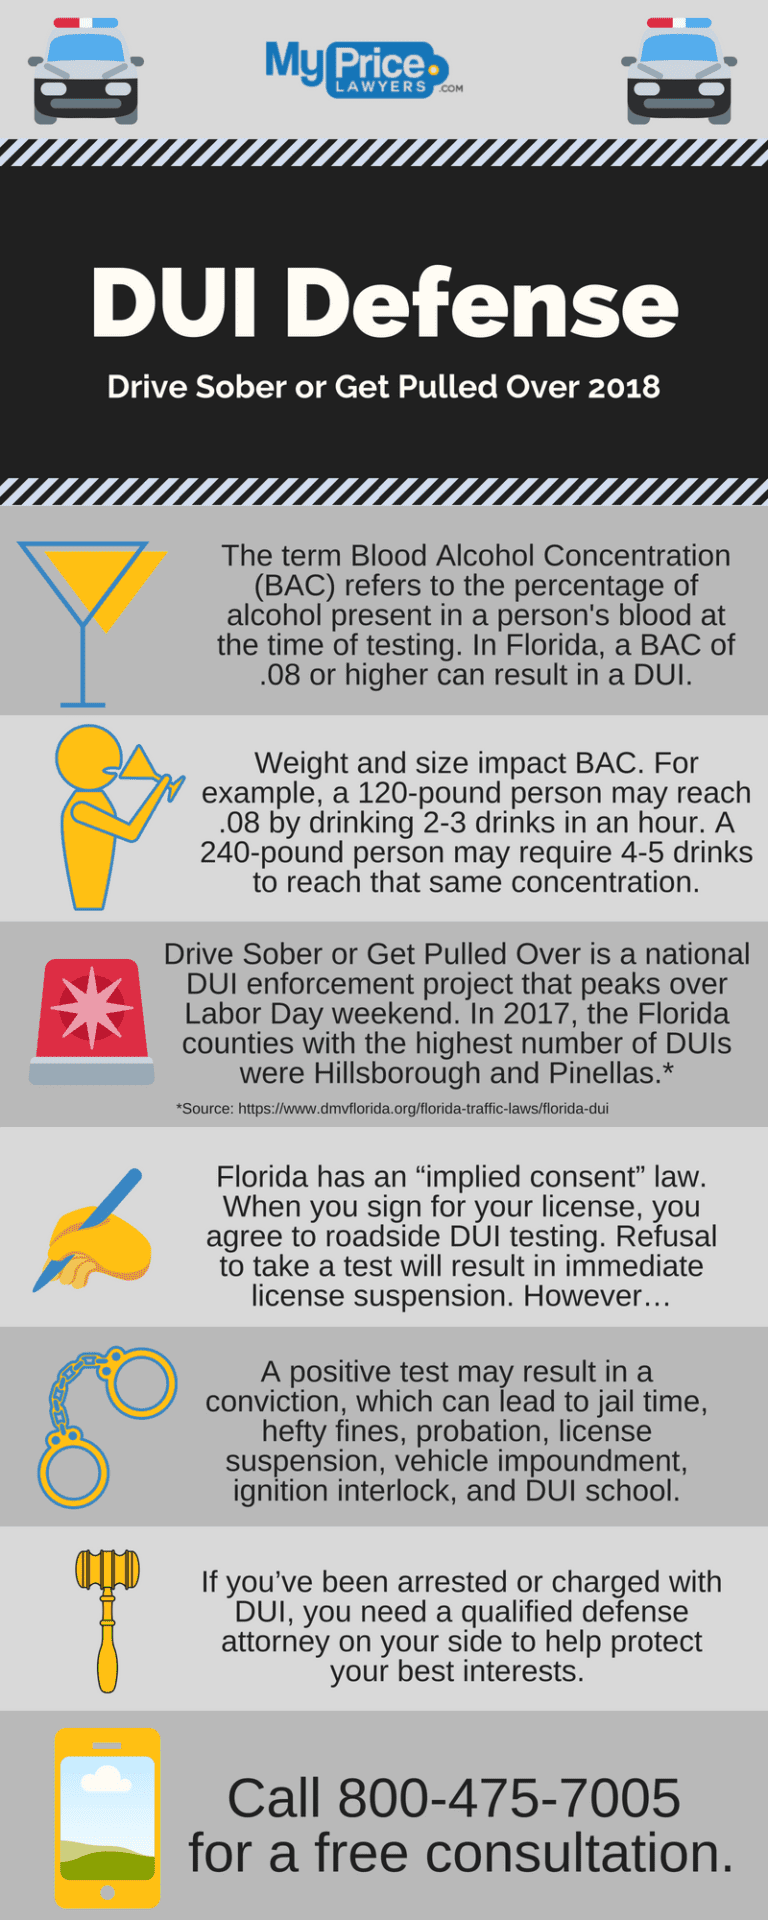 DUI Defense Infographic